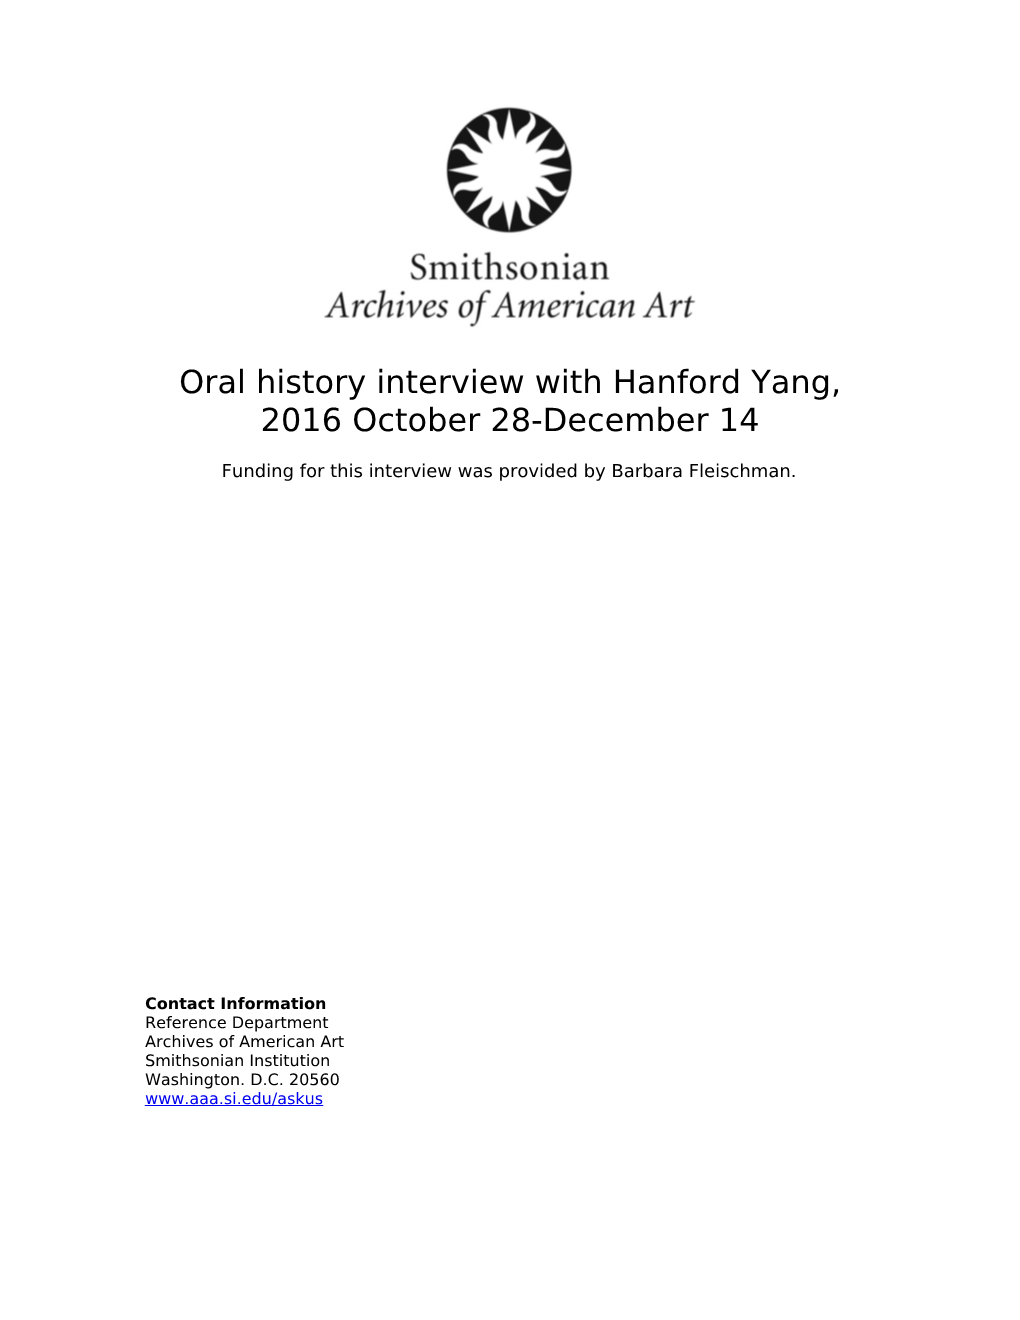 Oral History Interview with Hanford Yang, 2016 October 28-December 14